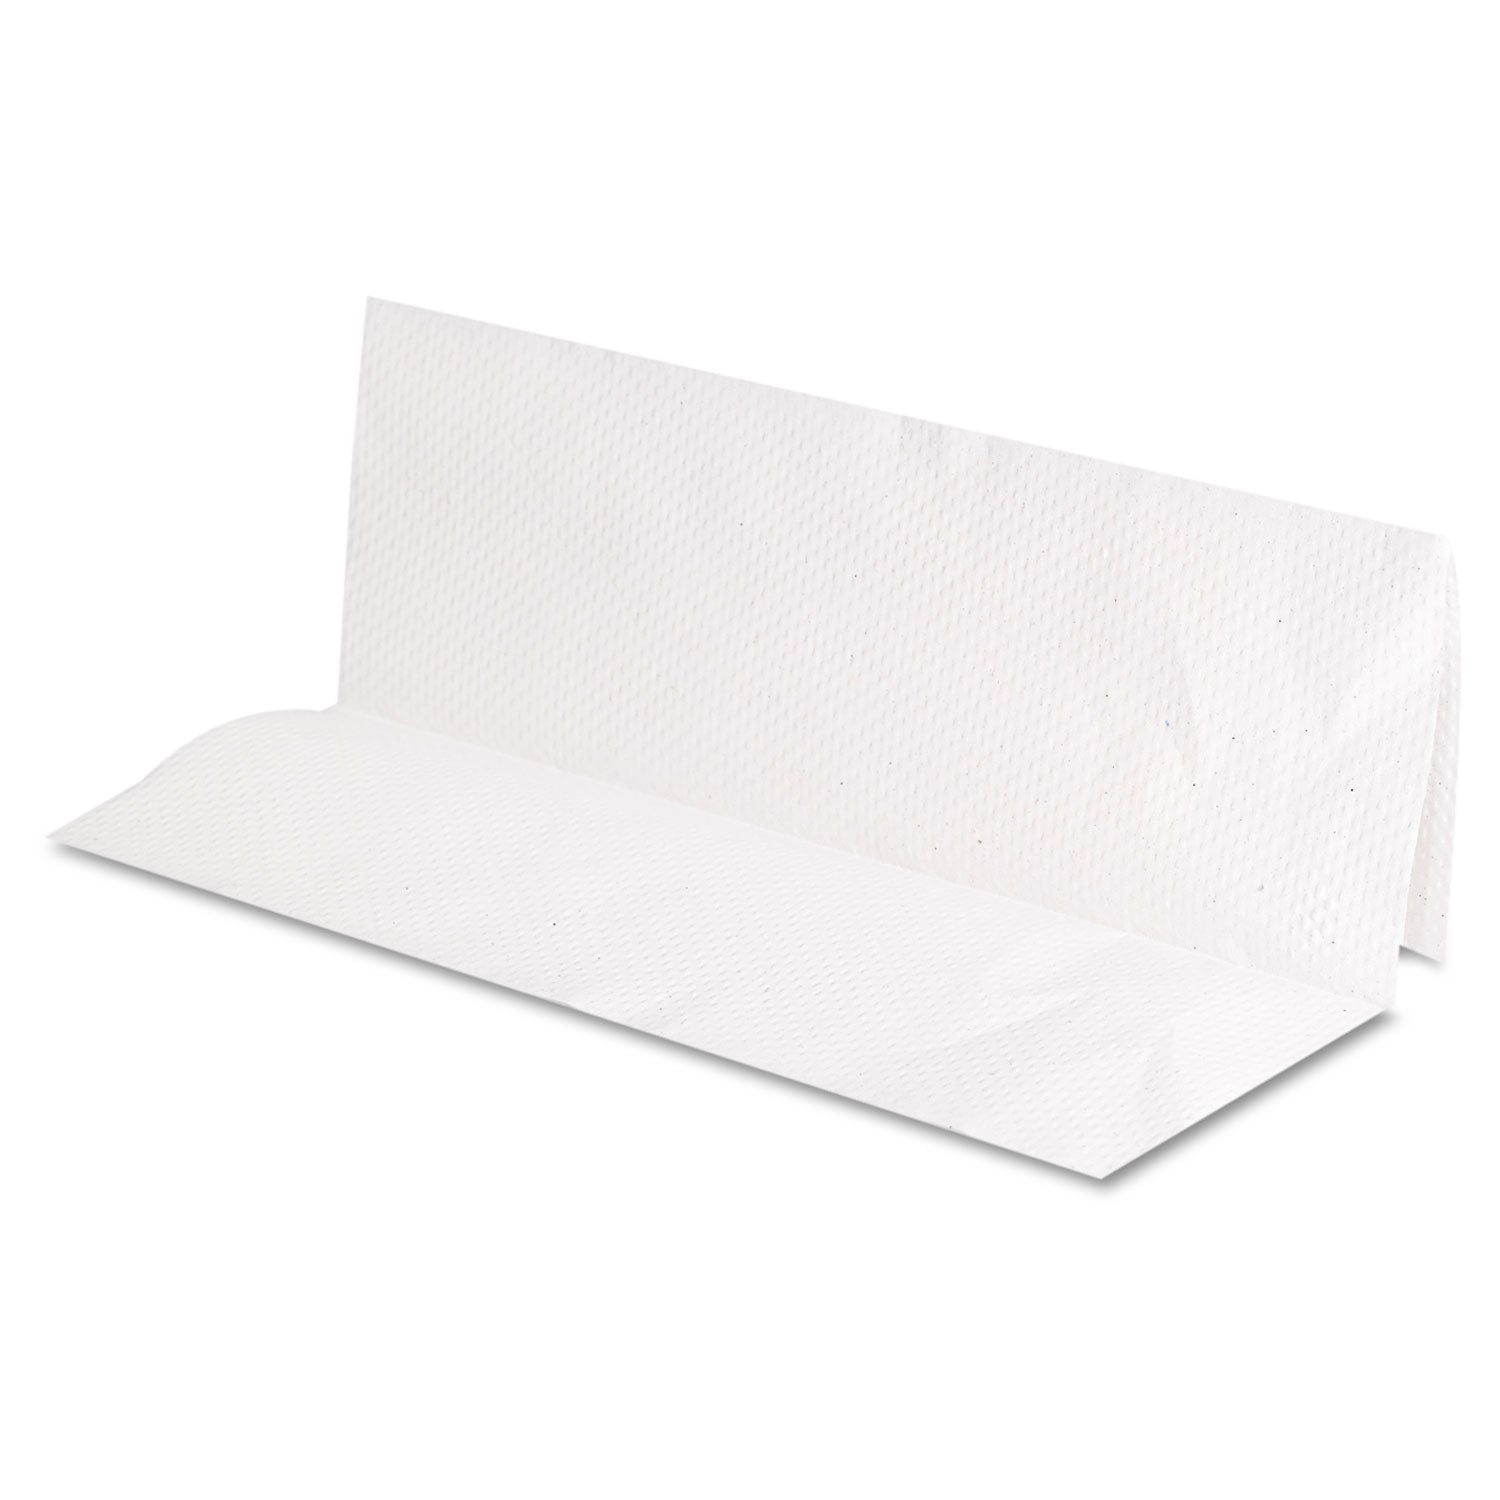 Folded Paper Towels, Multifold, 9 x 9.45, White, 250 Towels/Pack, 16 Packs/Carton - 